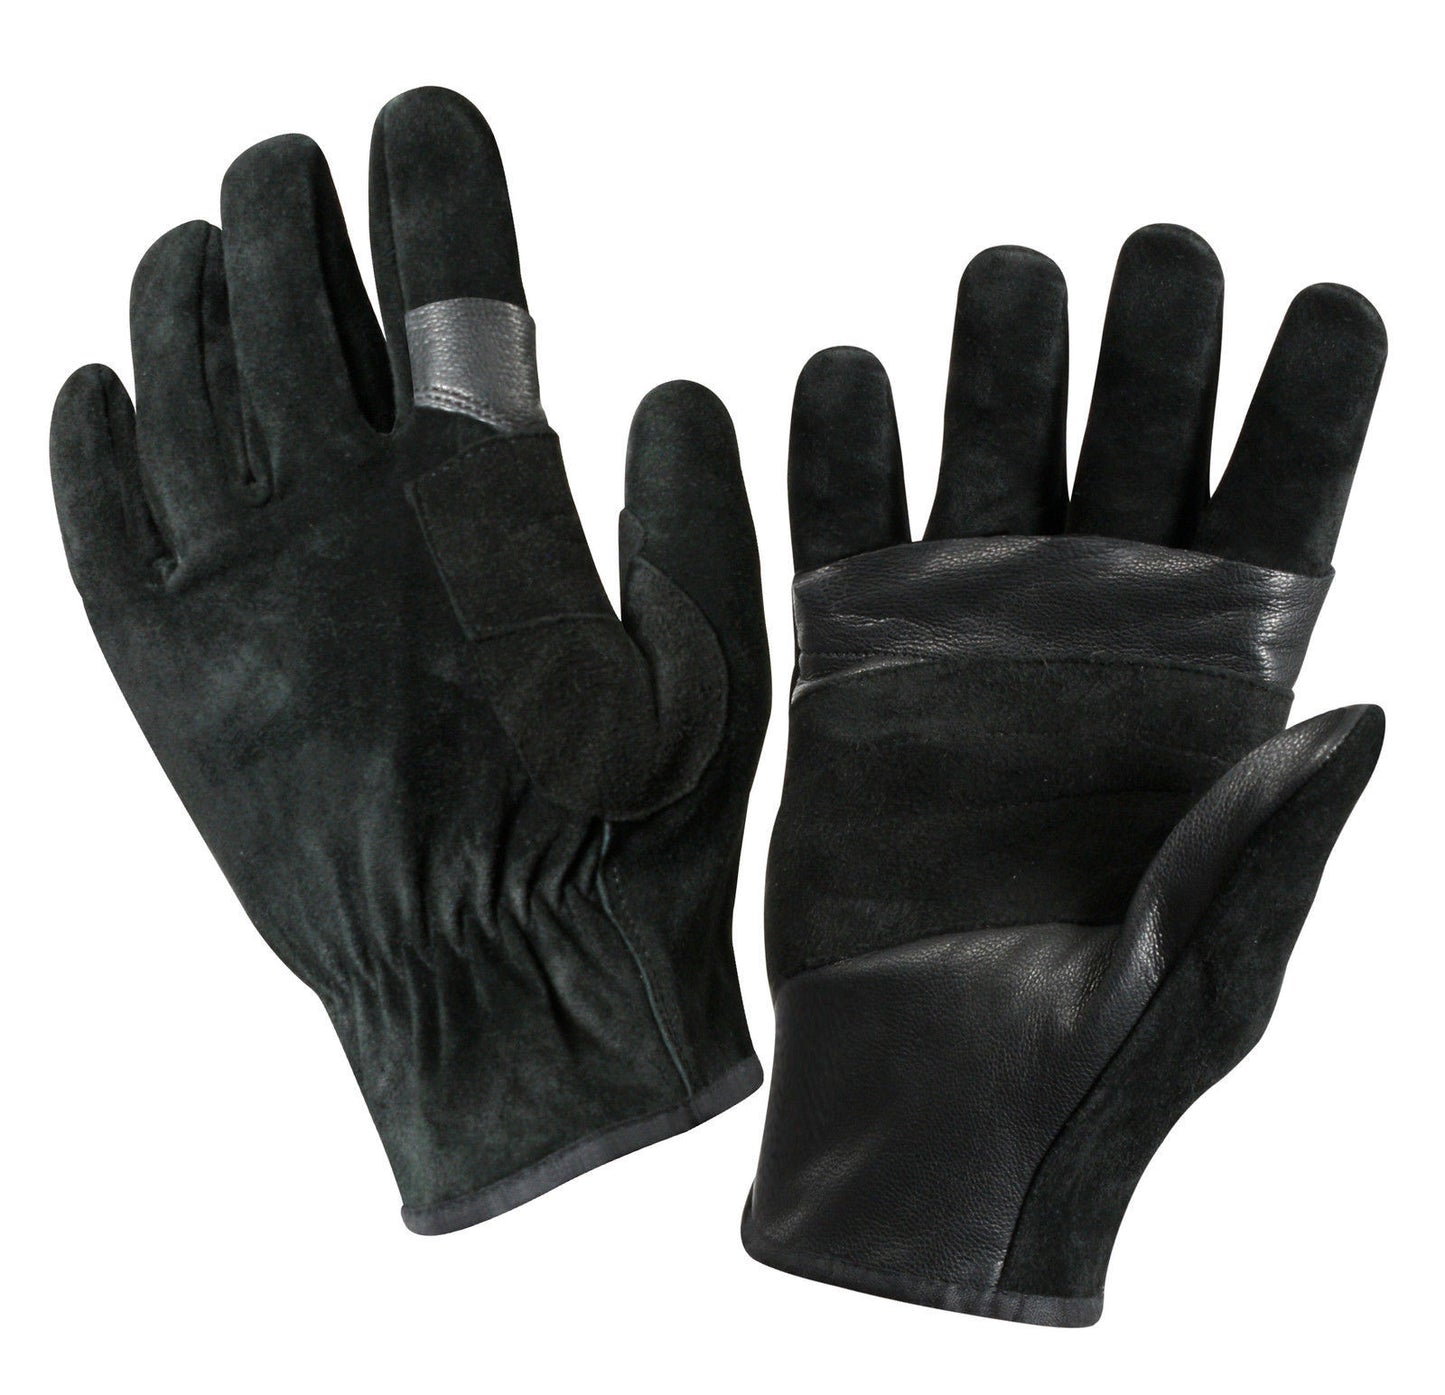 Swat/Police Fast Rope Black Leather Rescue Gloves - Small, Medium, Large, XL 2XL